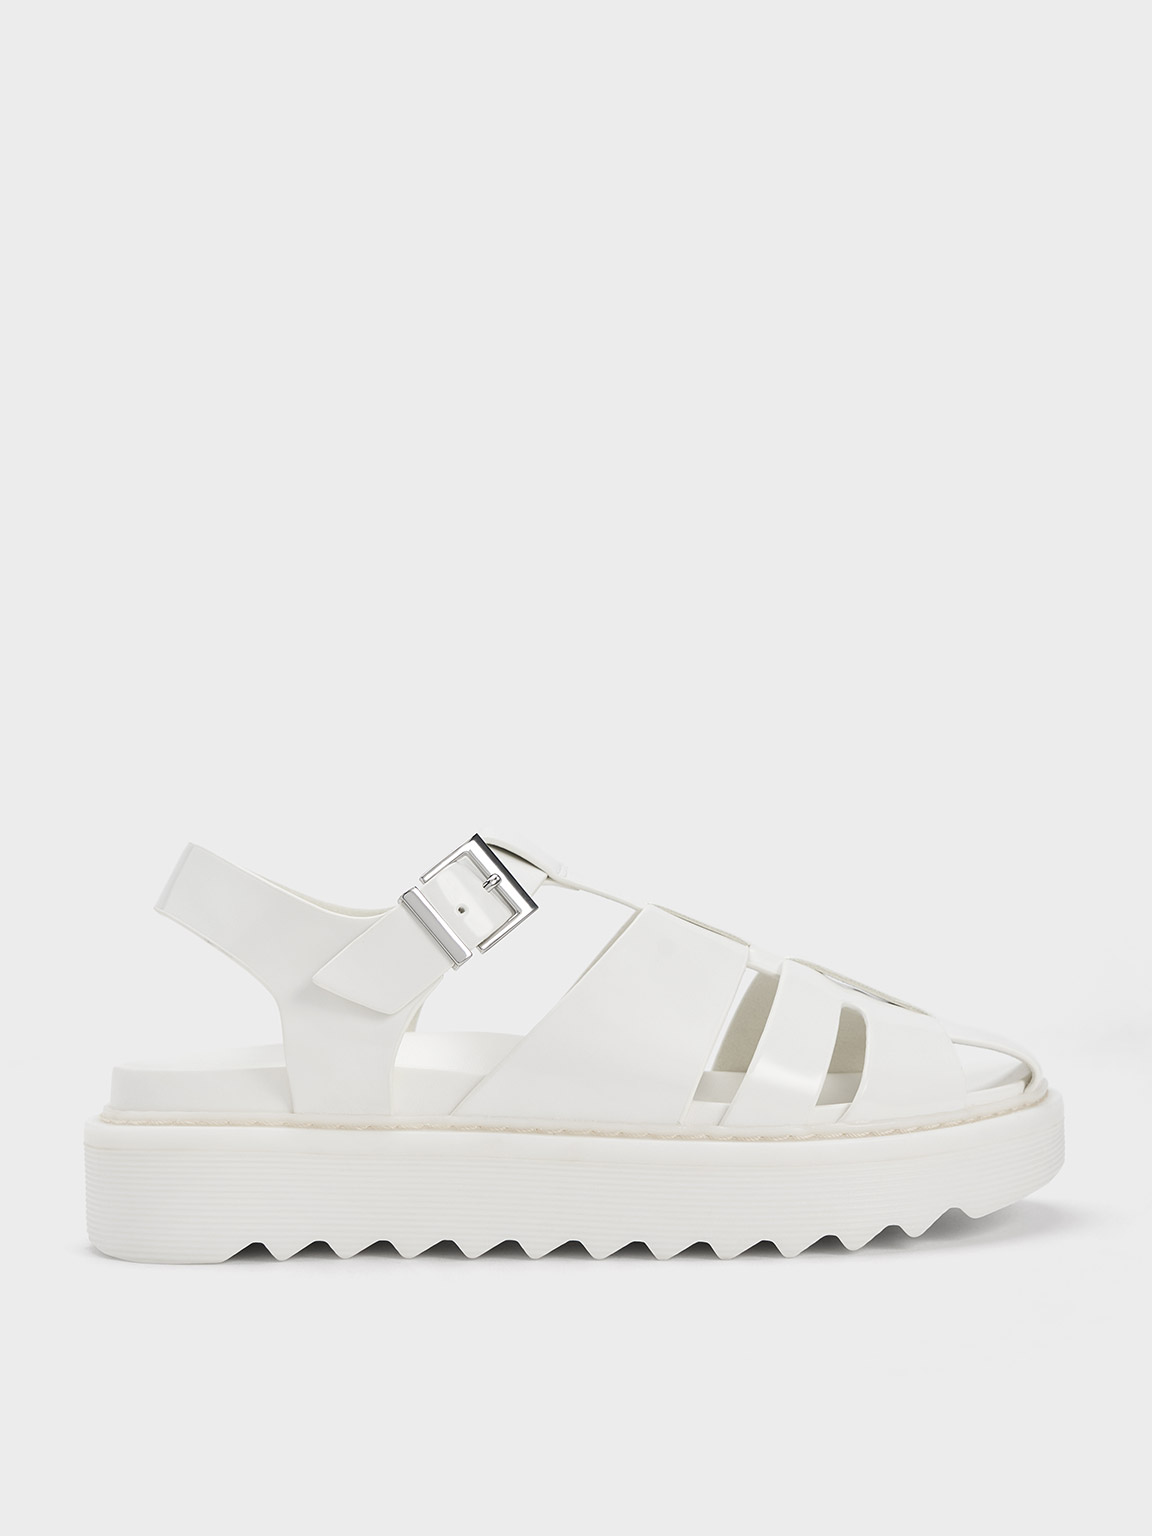 Charles & Keith Interwoven Buckled Sandals In White